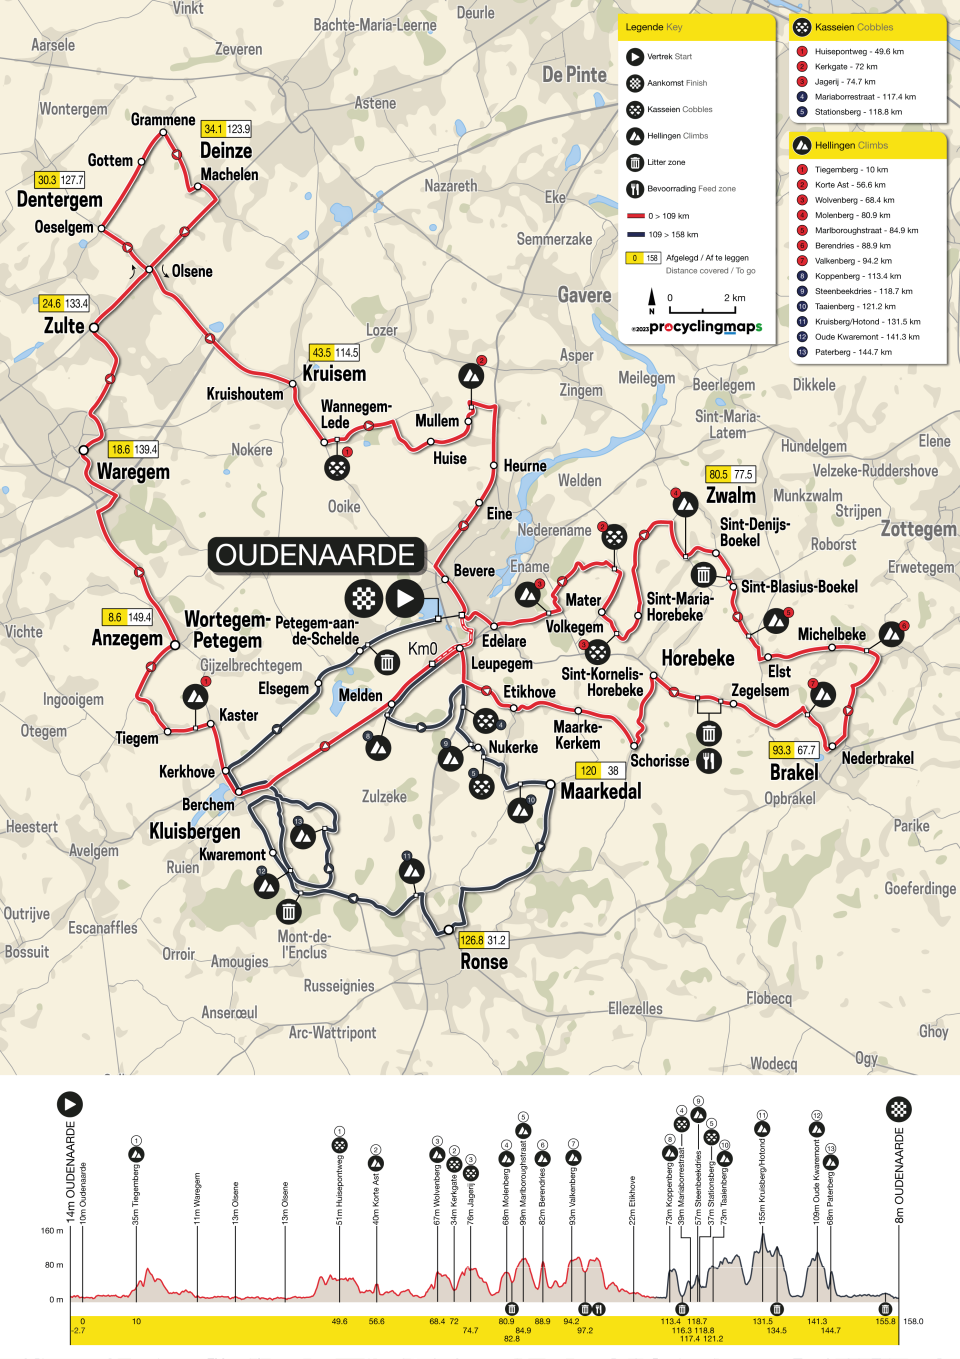 How to watch the Tour of Flanders live streaming